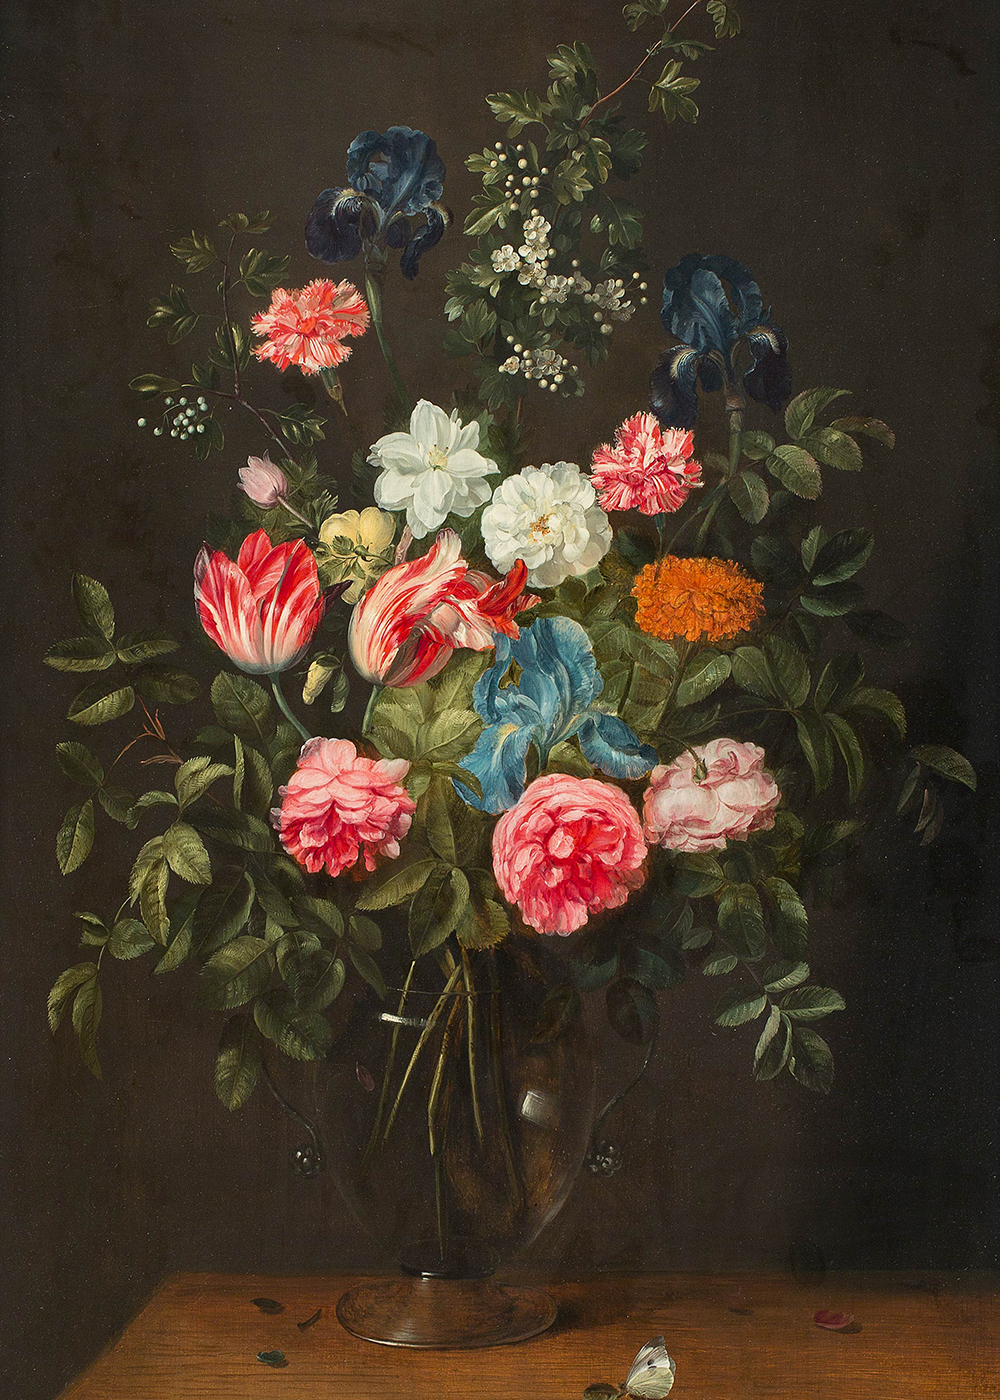 oil painting still life of a vase overflowing with spring flowers